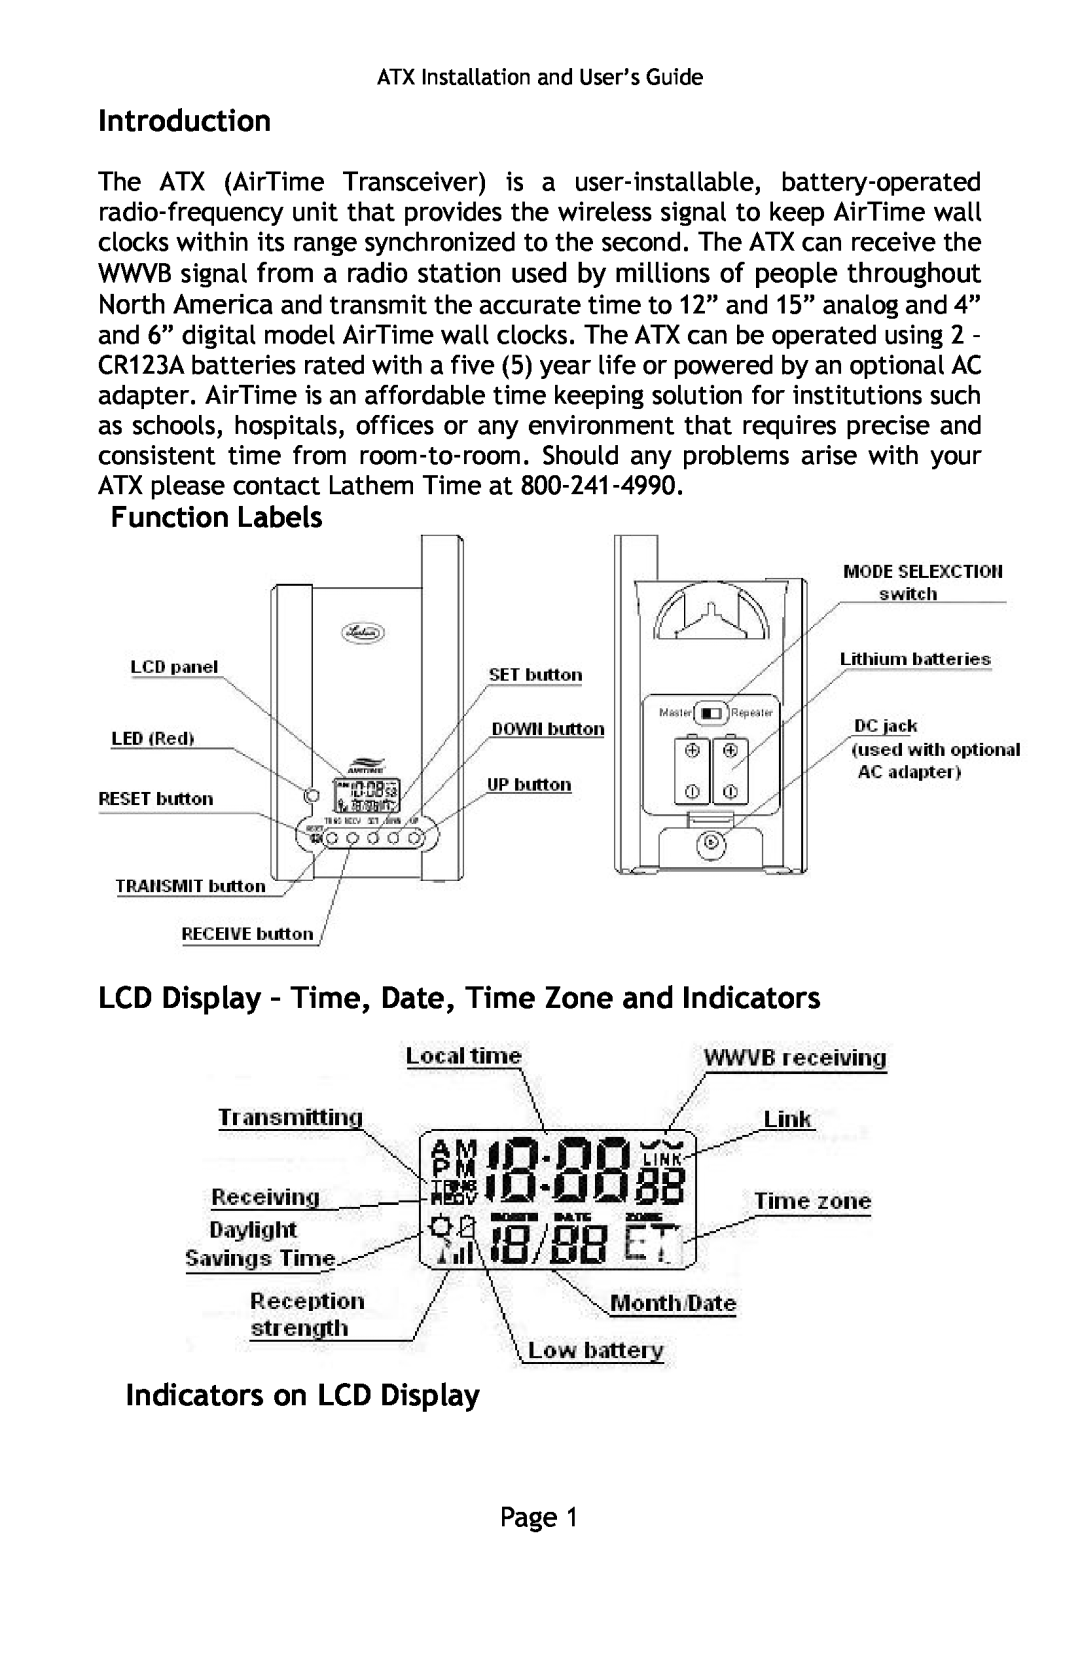 Lathem ATX manual Introduction, Indicators on LCD Display, Function Labels 